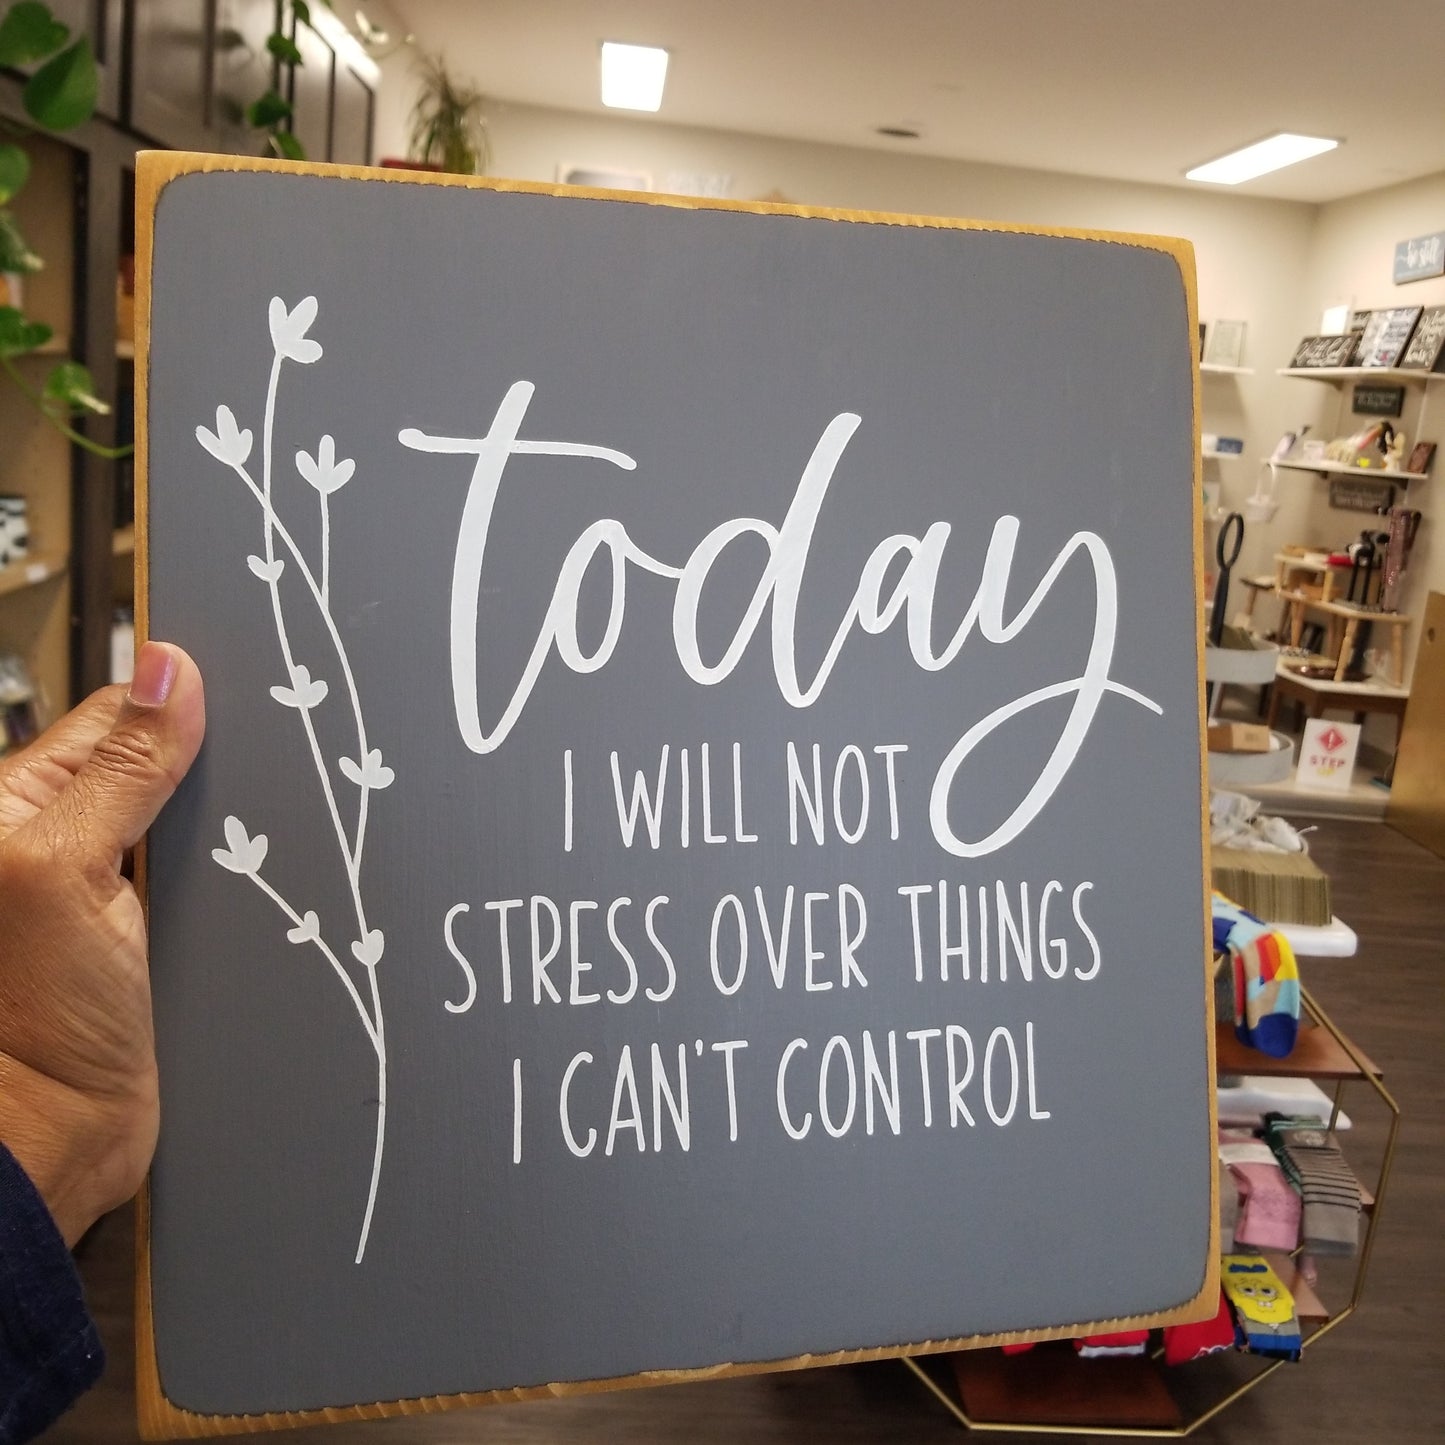 Today I will Not Stress - Inspirational Wooden Sign